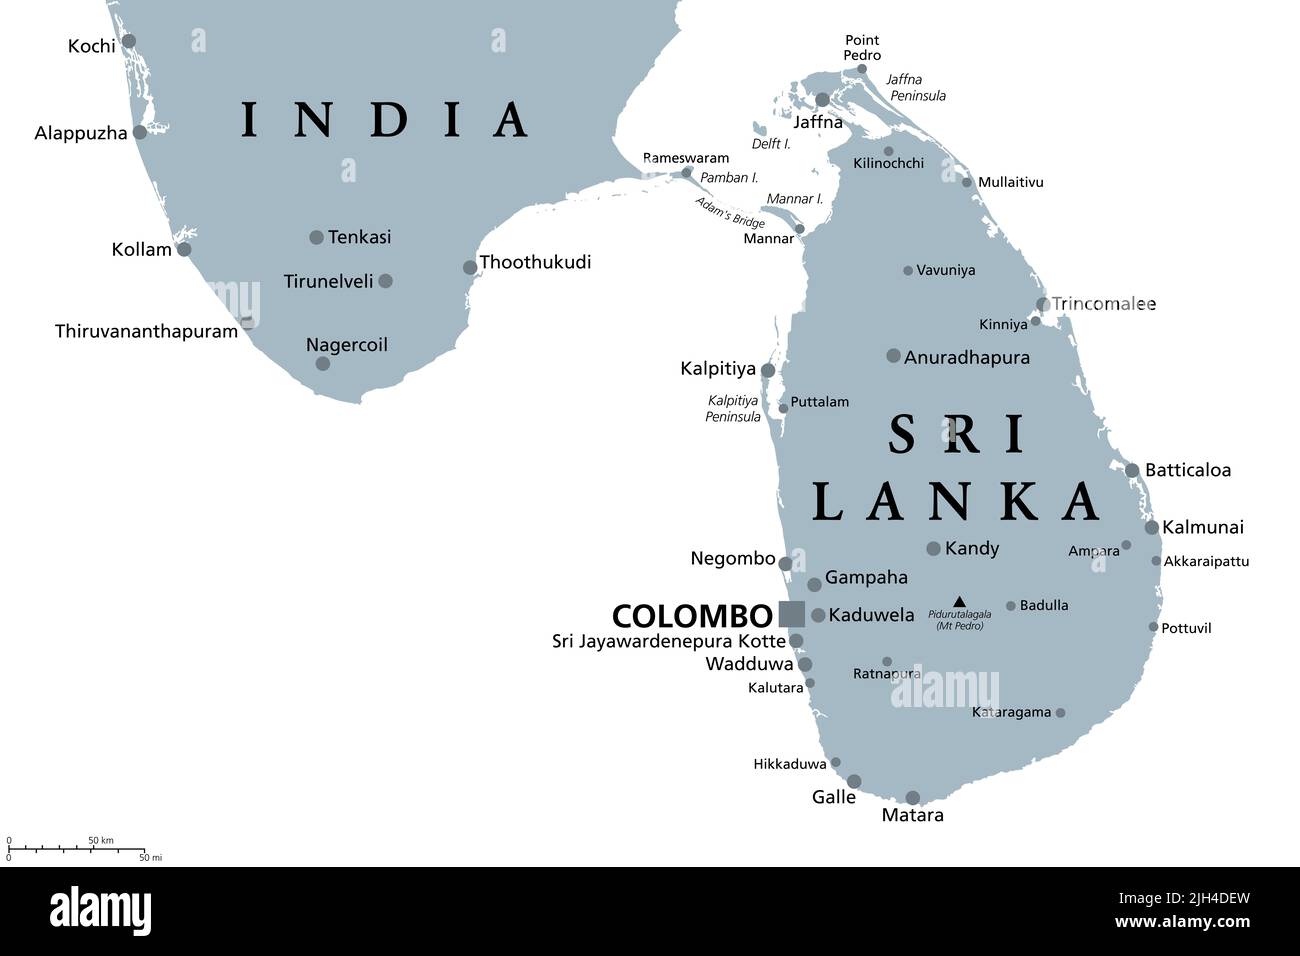 Sri Lanka and part of Southern India, gray political map. Democratic Socialist Republic of Sri Lanka, formerly Ceylon, island country in South Asia. Stock Photo